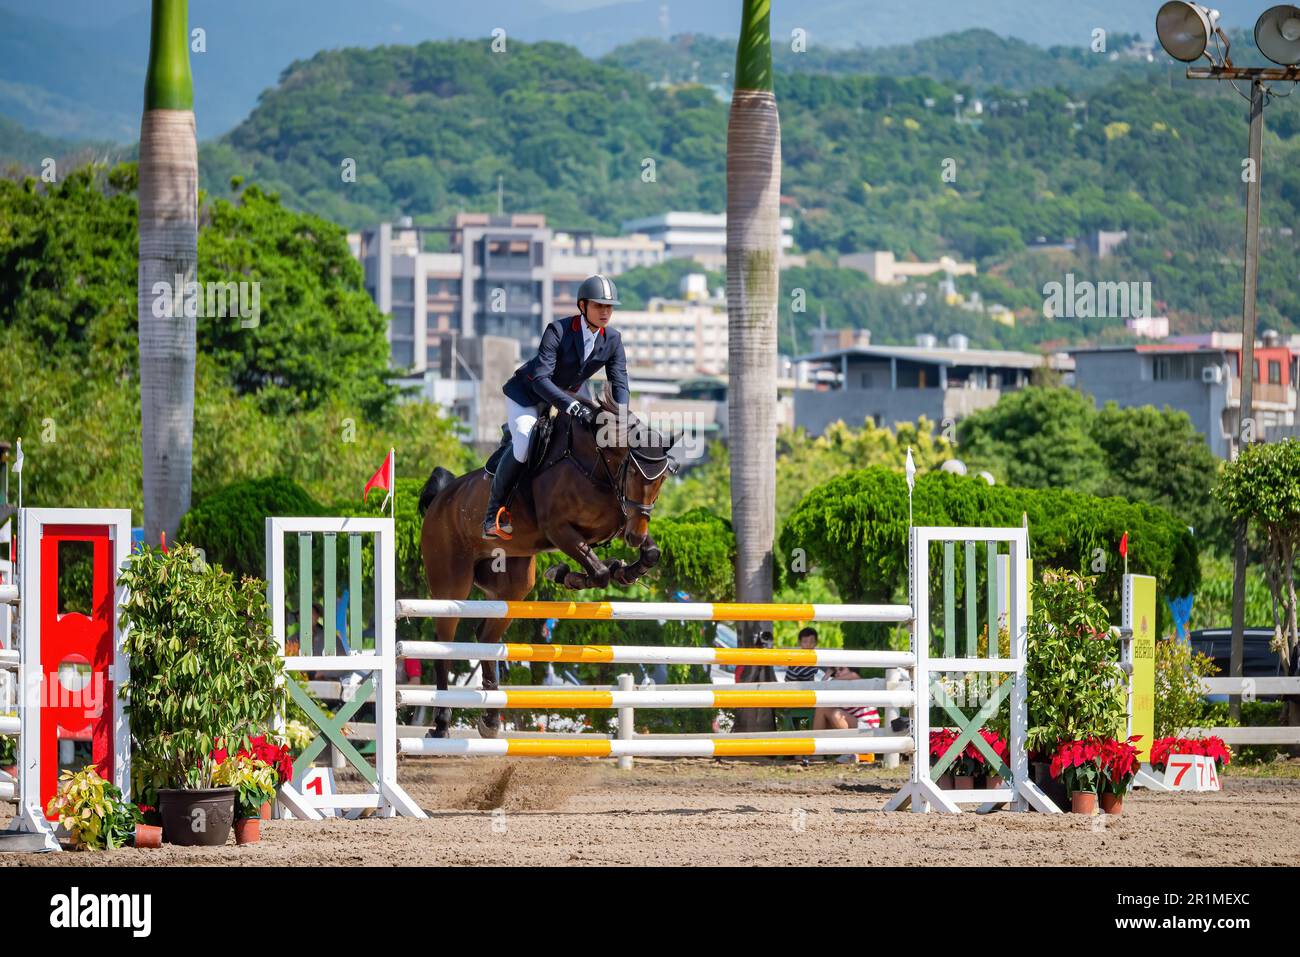 Taiwan, MAR 22 2013 - Sunny view of the equestrian in The National Games Stock Photo